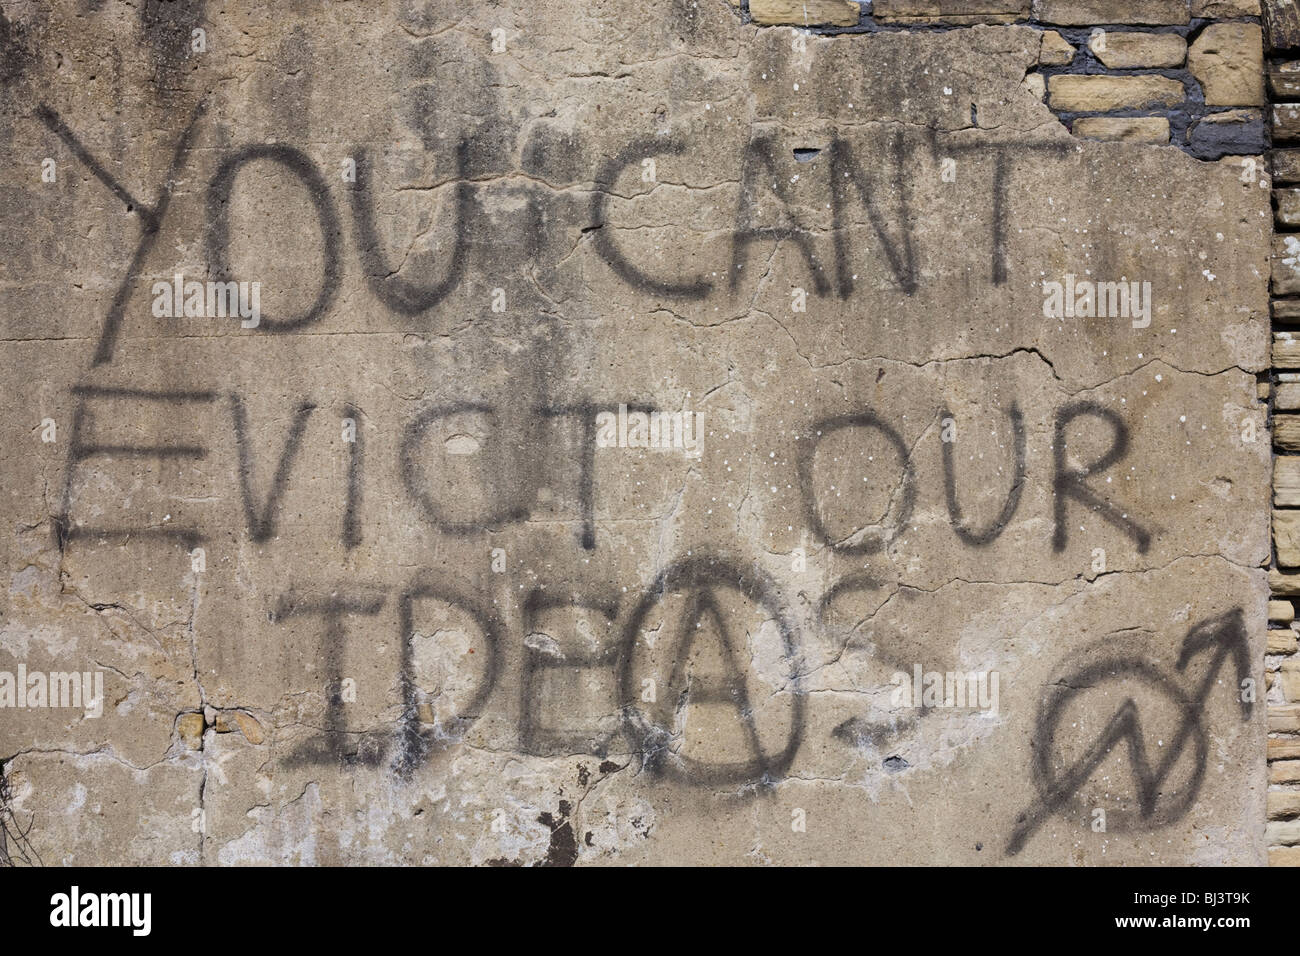 Anarchic graffiti sprayed on a rendered brick wall proclaims that a higher authority ‘Can’t evict our ideas’. Stock Photo